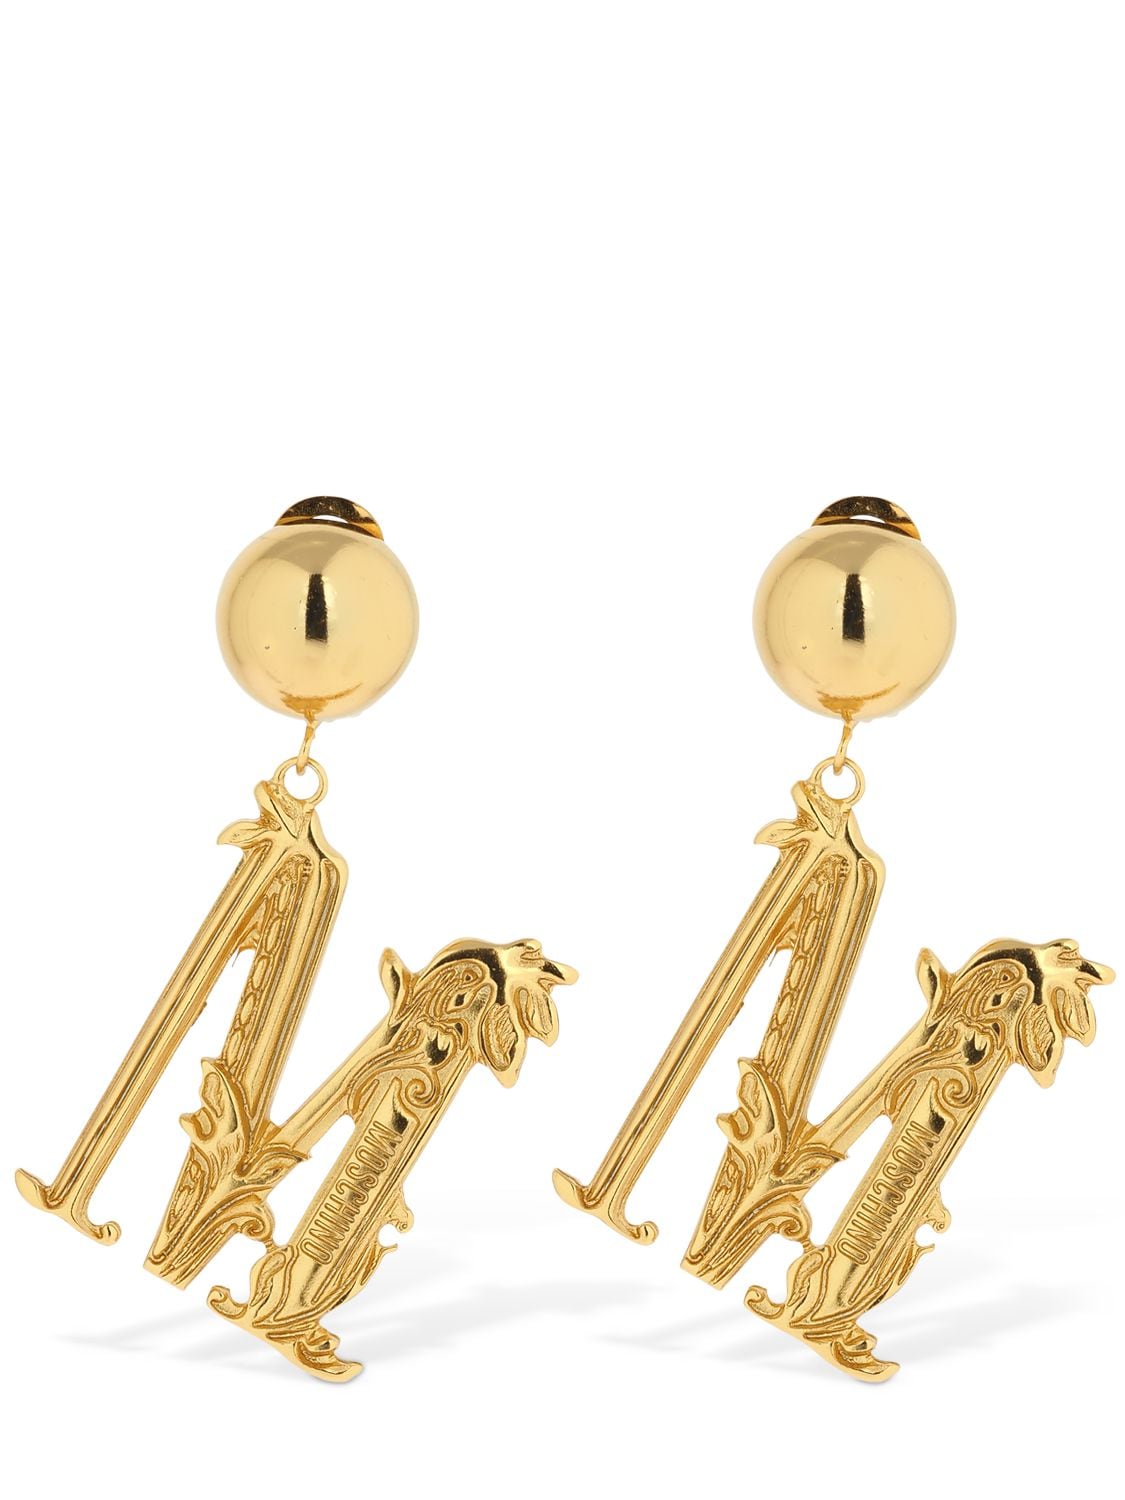 MOSCHINO "M" MOSCHINO ENGRAVED CLIP-ON EARRINGS,72IG1S002-NJA20